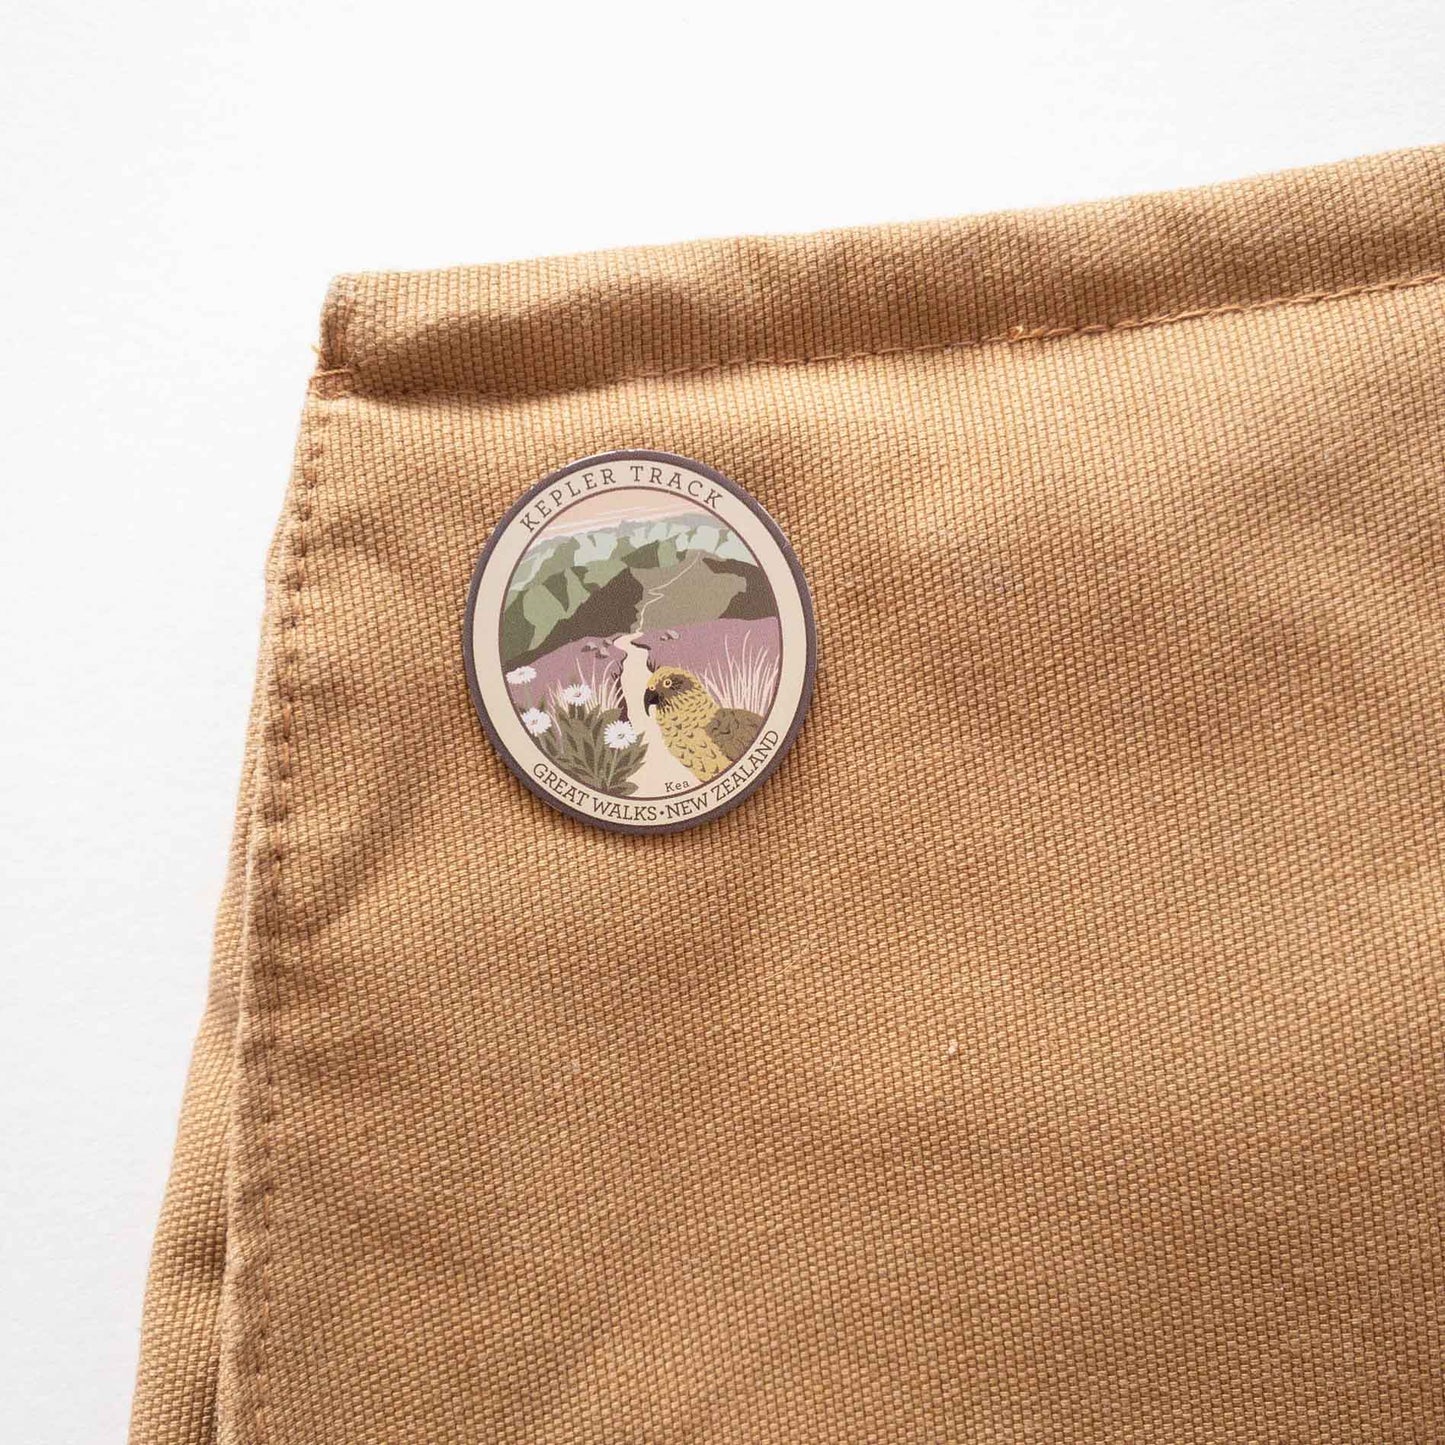 Oval Kepler Track pin, with a kea, mountain daisy and alpine ridges, on a brown canvas bag, on a brown canvas bag.